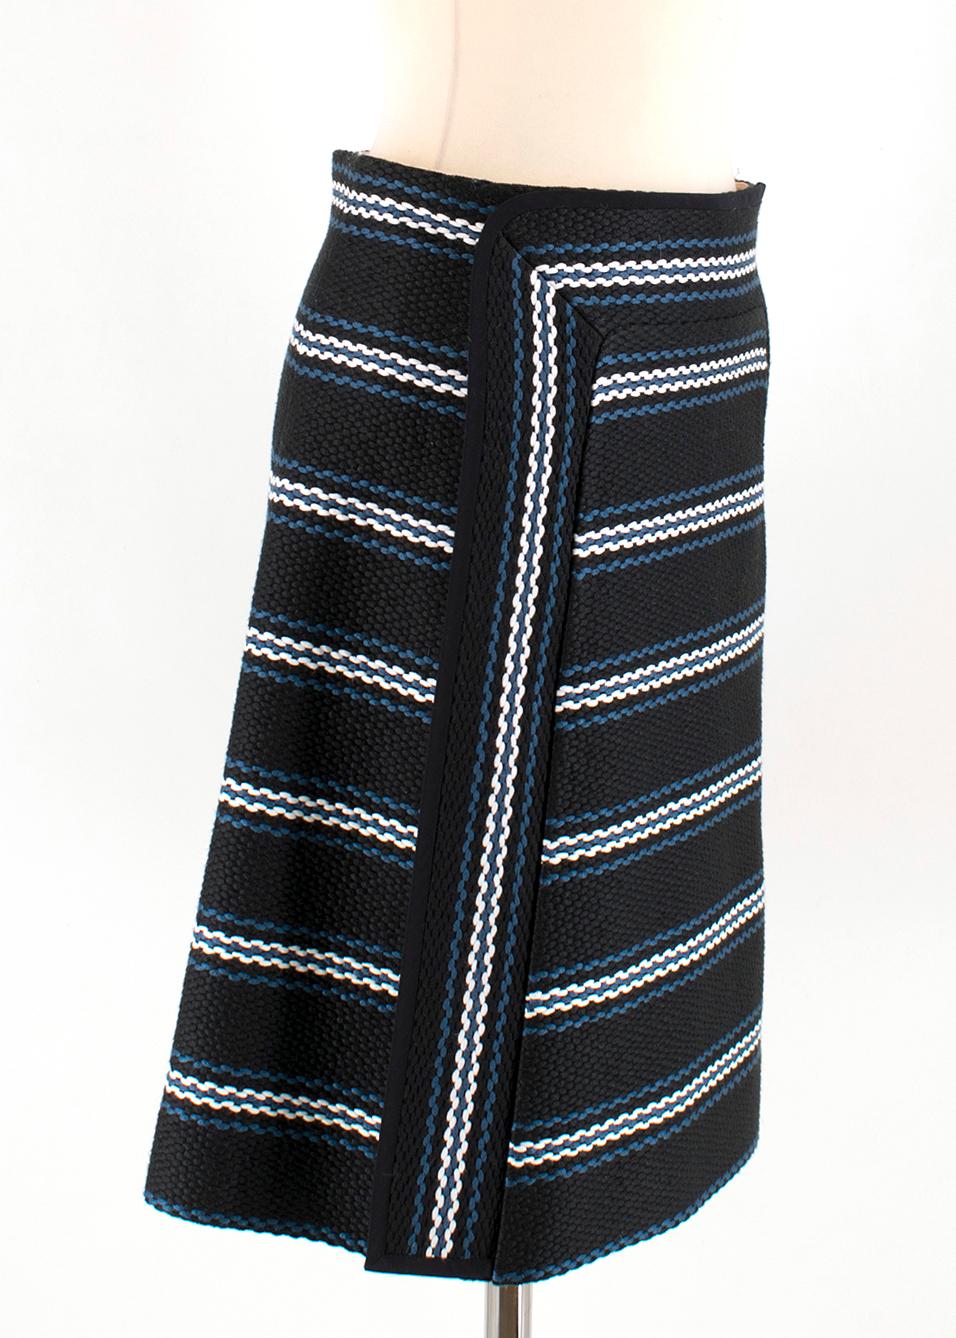 Chloe Black Embroidered A-Line Skirt 

- Knit black skirt 
- A-line
- Silk lining 
- Knee length
- White and blue stripes 

Please note, these items are pre-owned and may show some signs of storage, even when unworn and unused. This is reflected